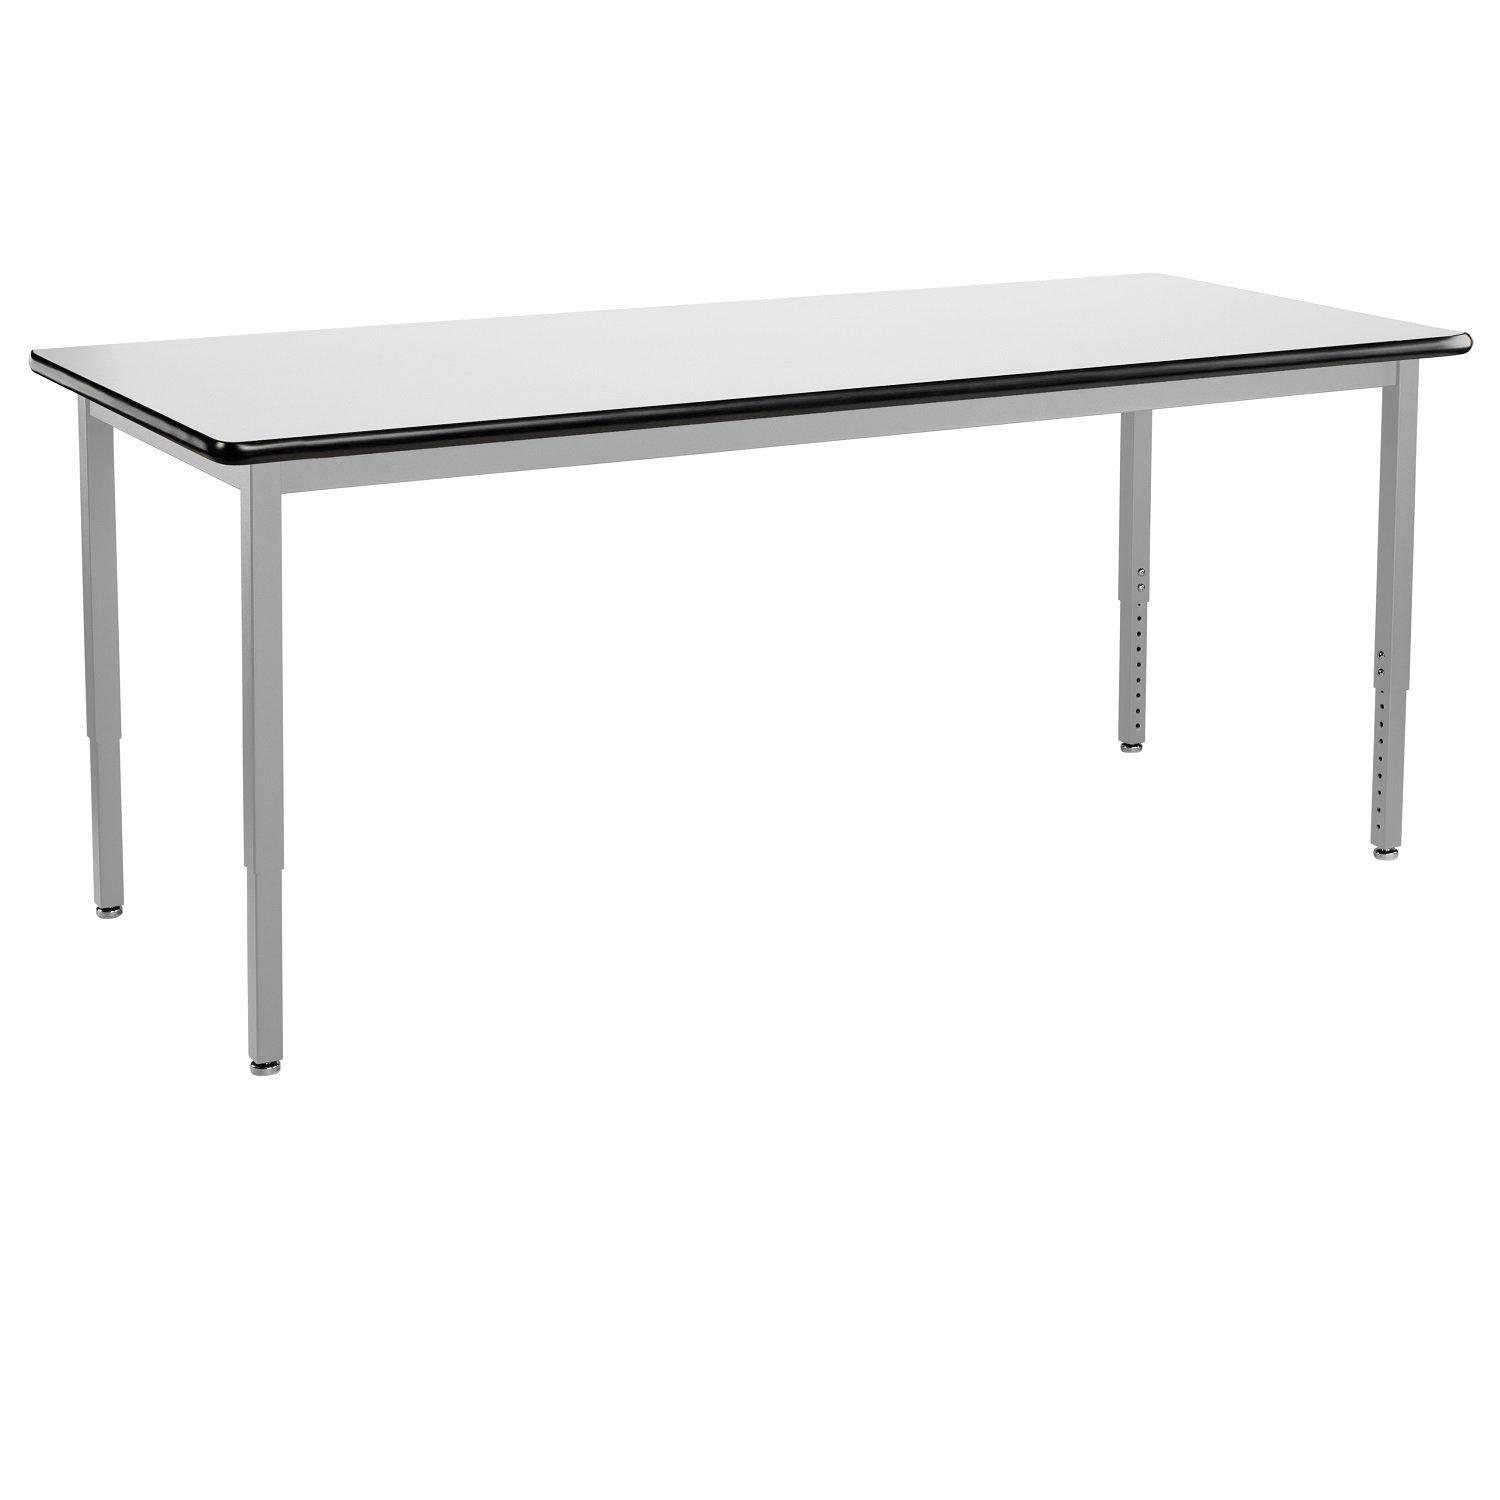 Heavy-Duty Height-Adjustable Utility Table, Soft Grey Frame, 24" x 72", Whiteboard High-Pressure Laminate Top